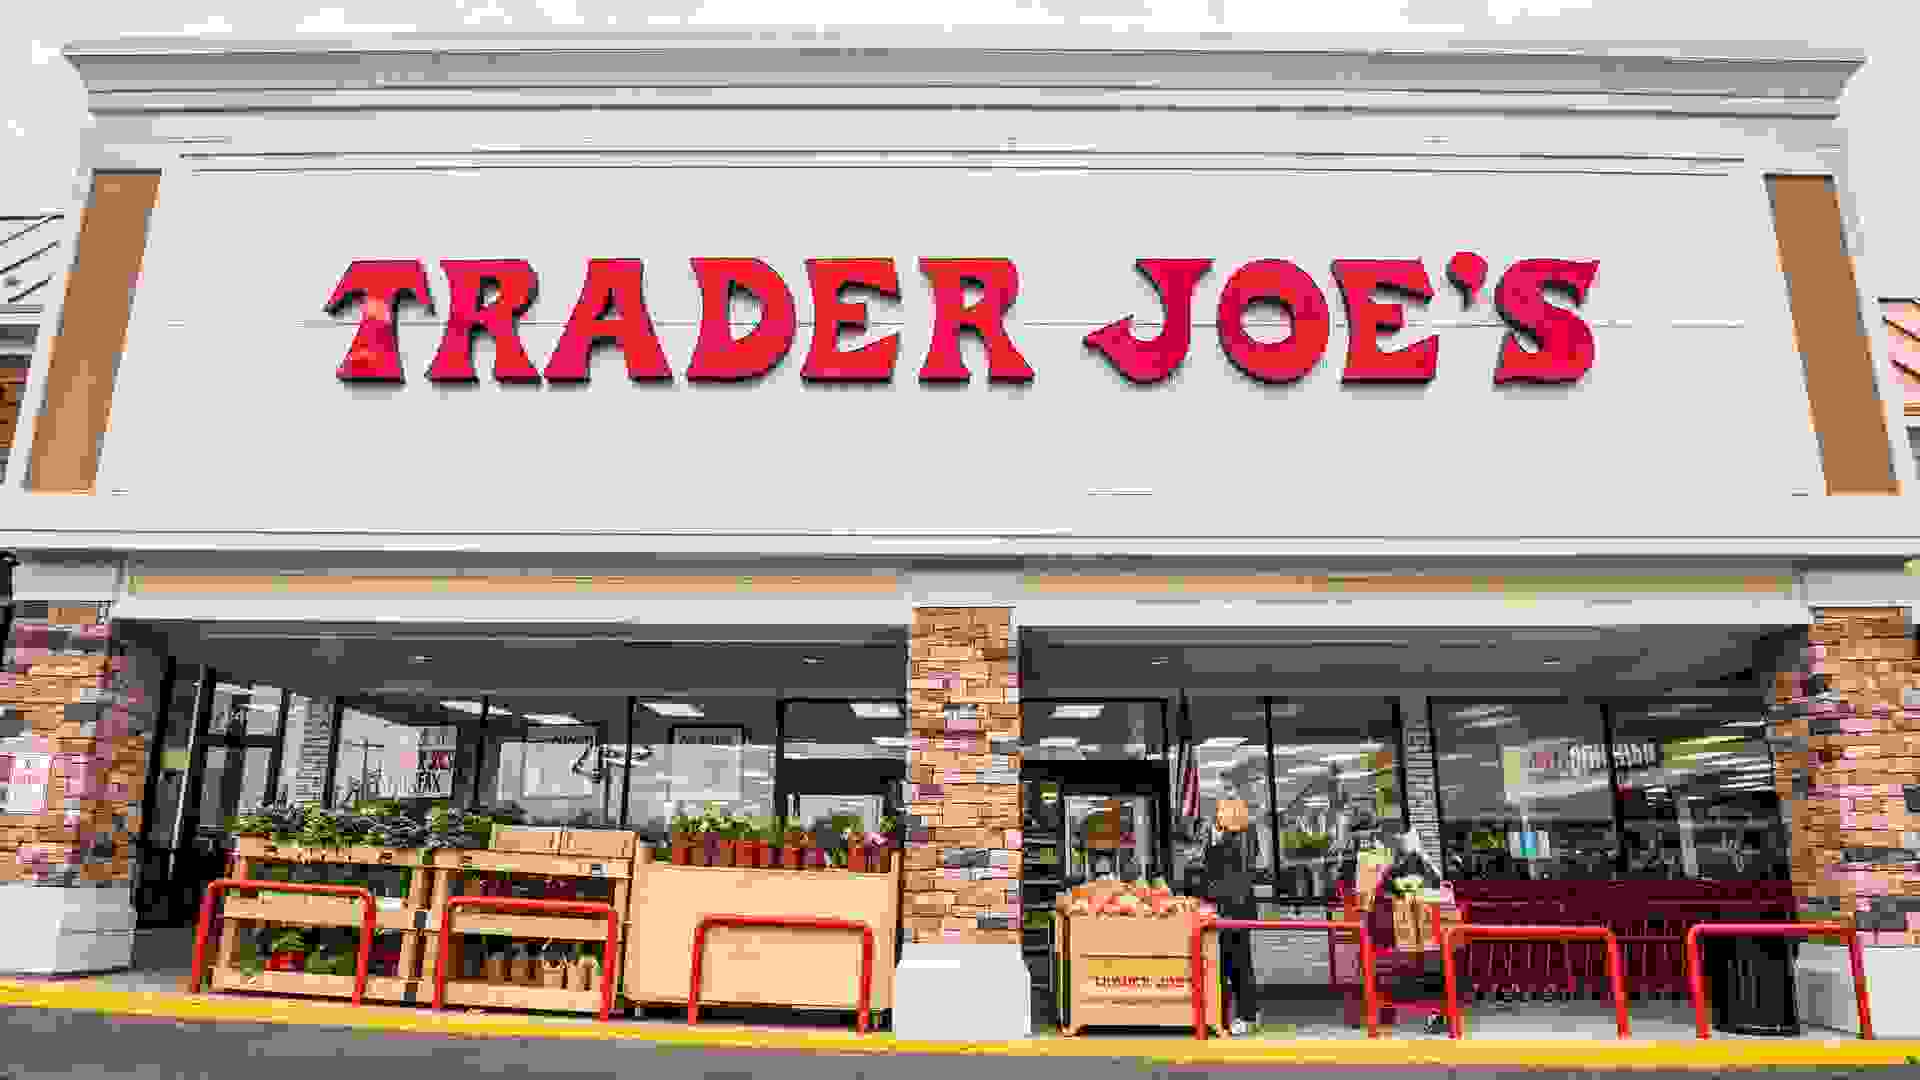 Fairfax, USA - November 25, 2016: Trader Joes grocery store facade with sign and items on display and people walking.